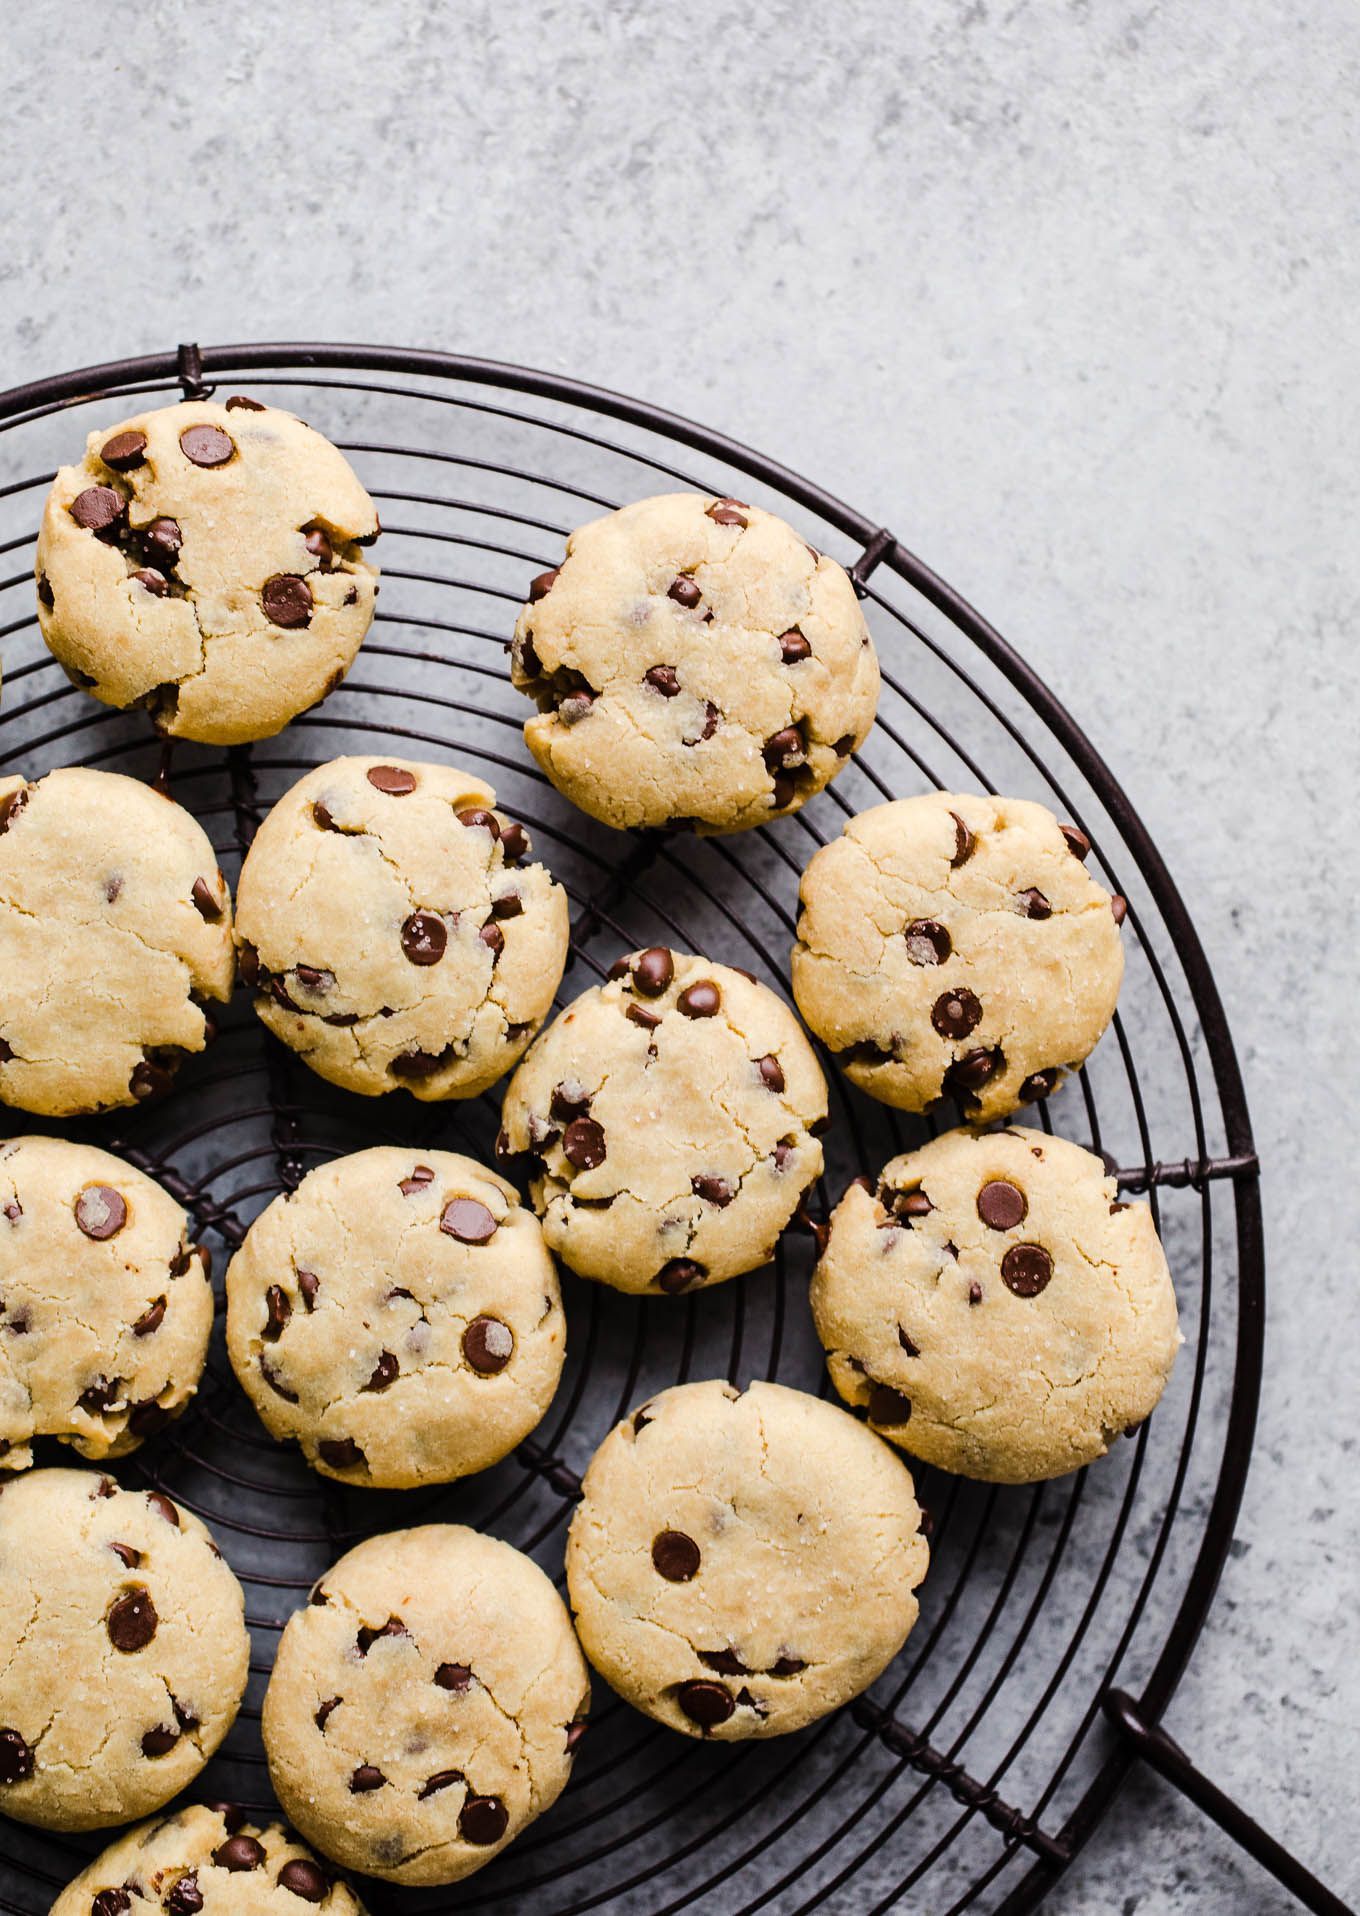 Gluten-Free Olive Oil Chocolate Chip Cookies (Vegan) -   13 healthy recipes Gluten Free chocolate chip cookies ideas